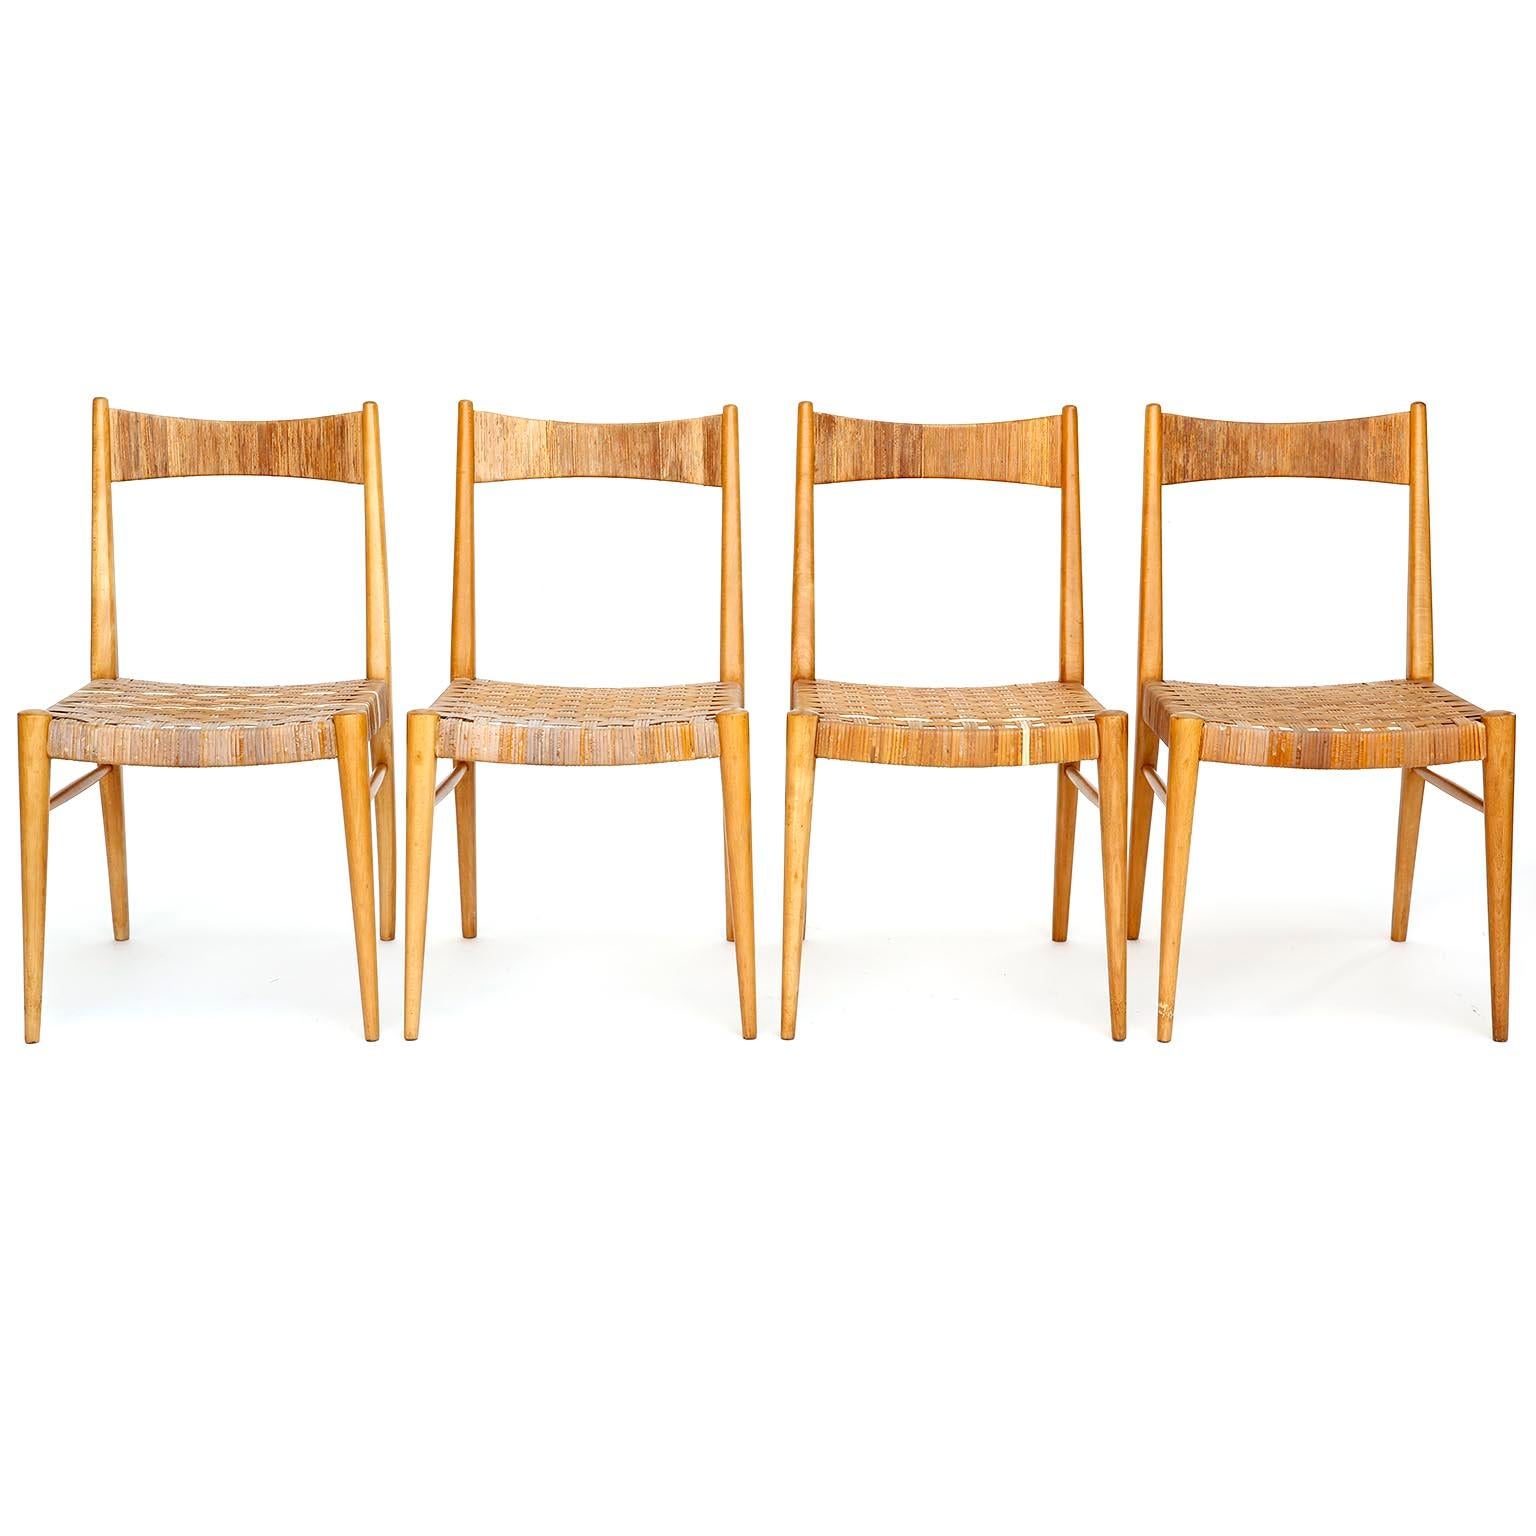 A set of four dining room or side chairs designed by Anna-Luelja Praun (1906-2004), Vienna, Austria, manufactured in midcentury, circa 1950.
The seats and backs are covered with cane or wicker. The cane of two chairs has been restored. On one chair